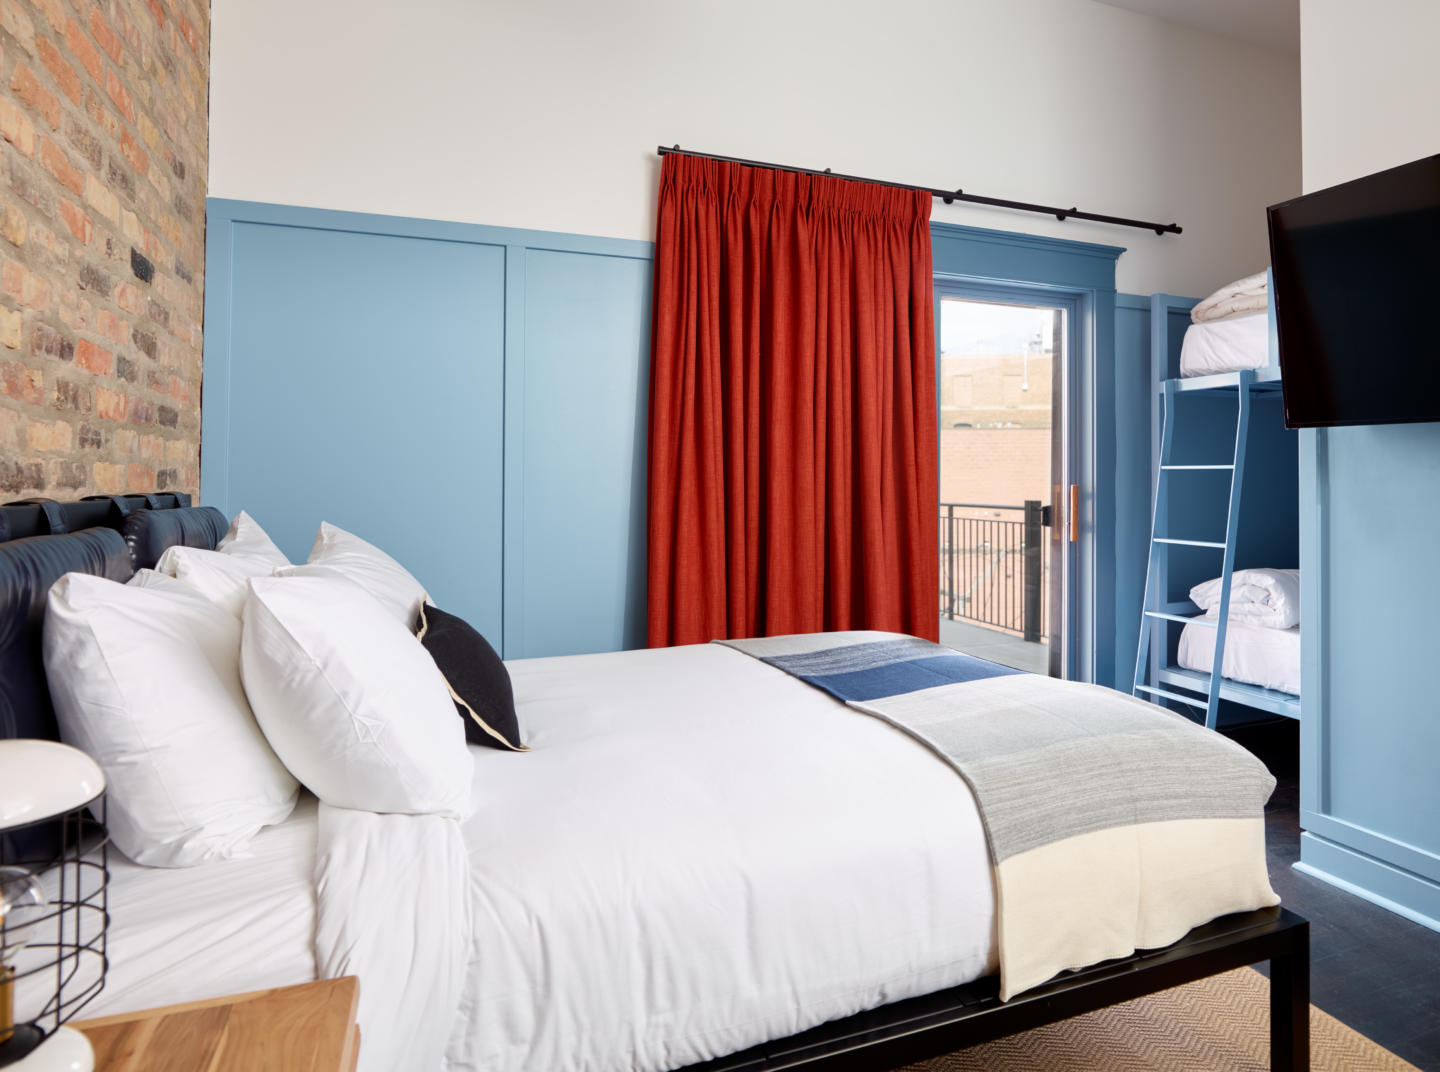 Guest suite at boutique hotel with bed, furniture, and bunk beds made by Morgan Li 